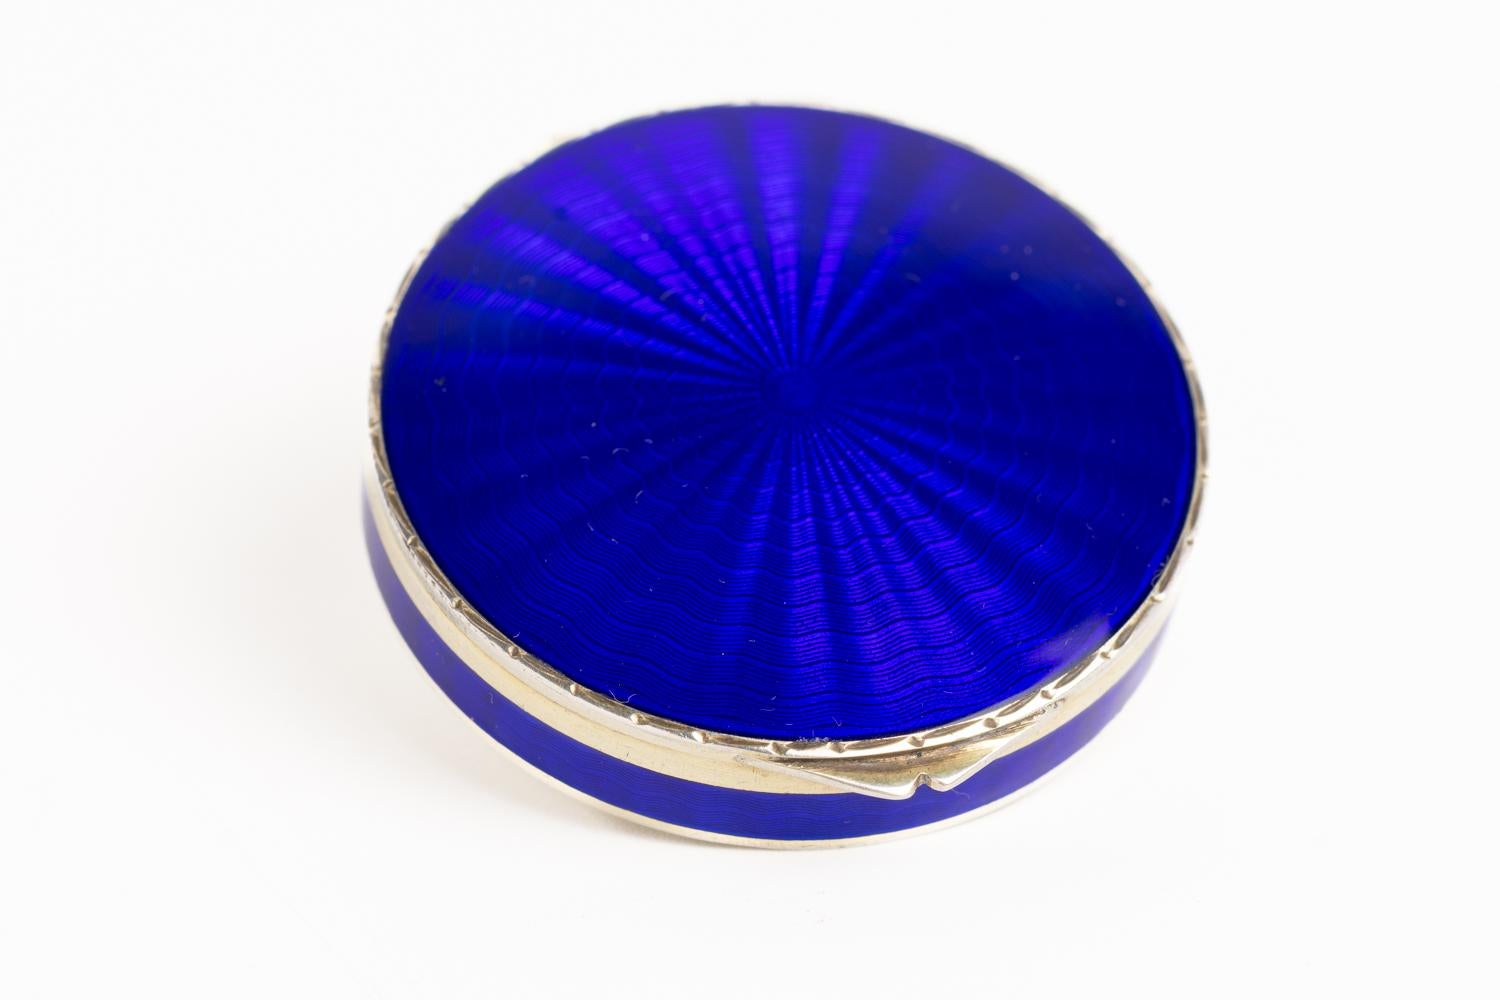 This Art Deco 1920's Cobalt Blue guilloche enamel and silver gilt mirror compact is most likely made in Switzerland. The front cover of this unique piece is decorated in a striking cobalt blue guilloche enamel with a circular design that gives an